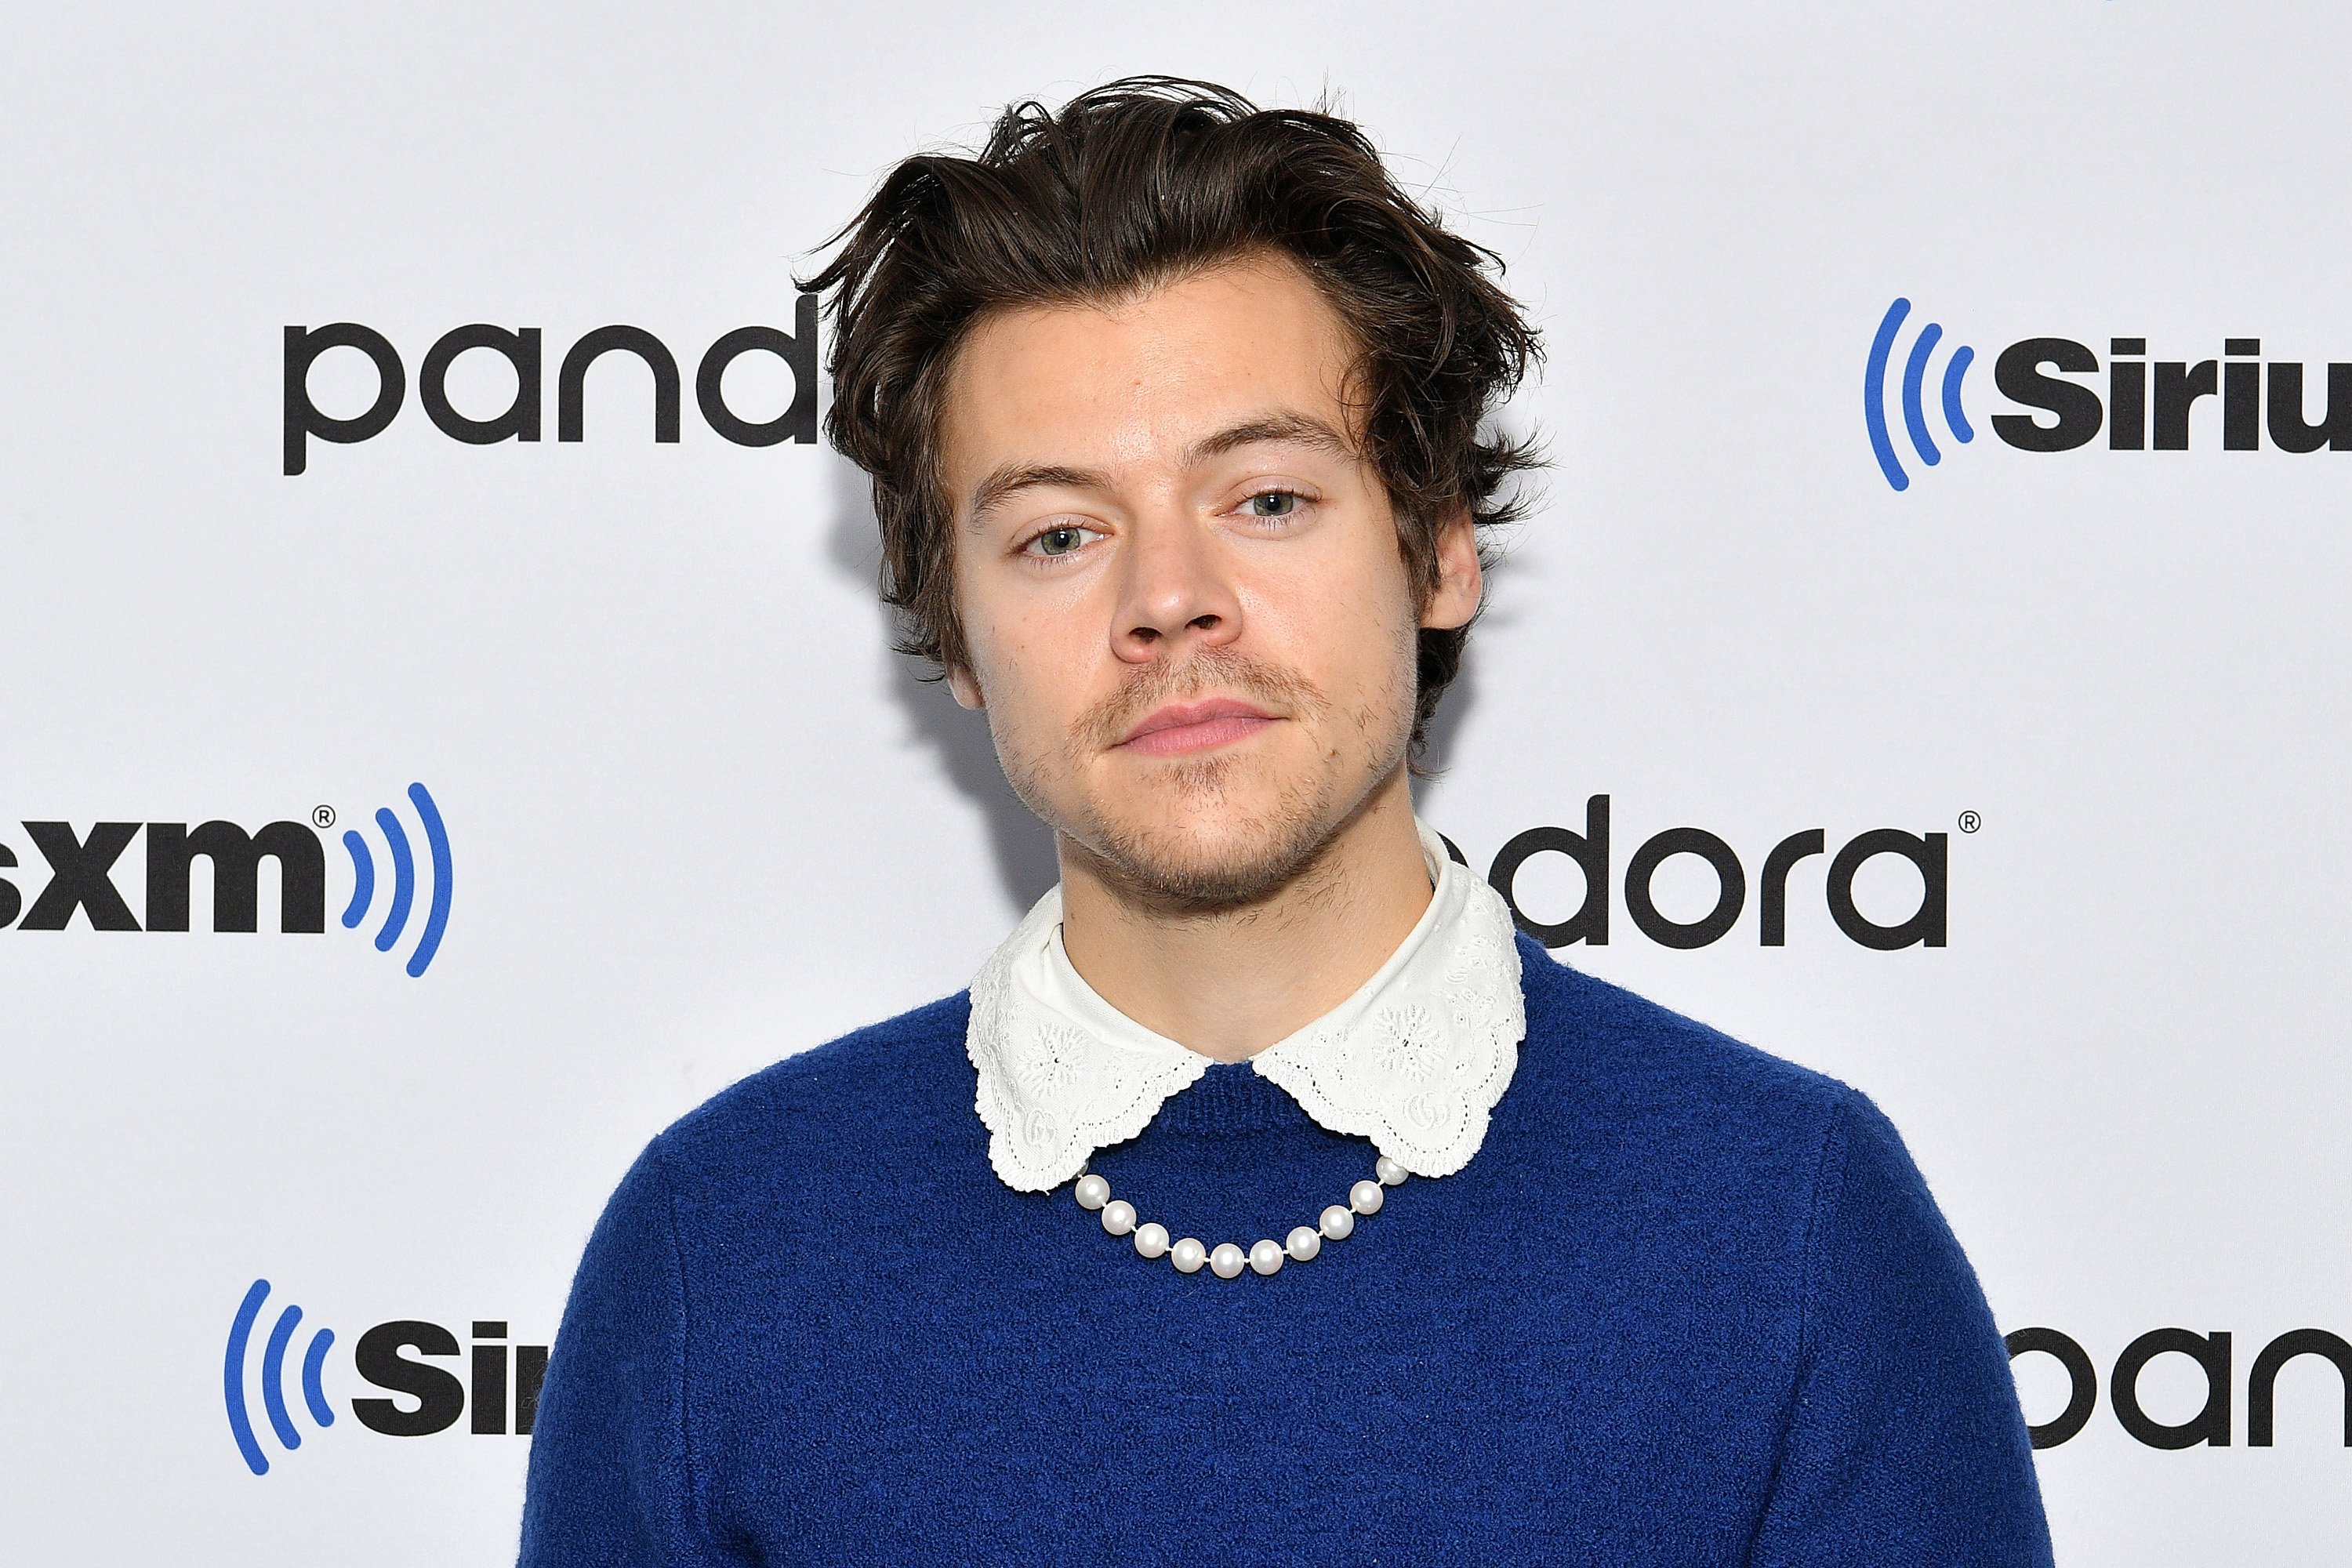 Harry Styles wearing a blue sweater and a pearl necklace